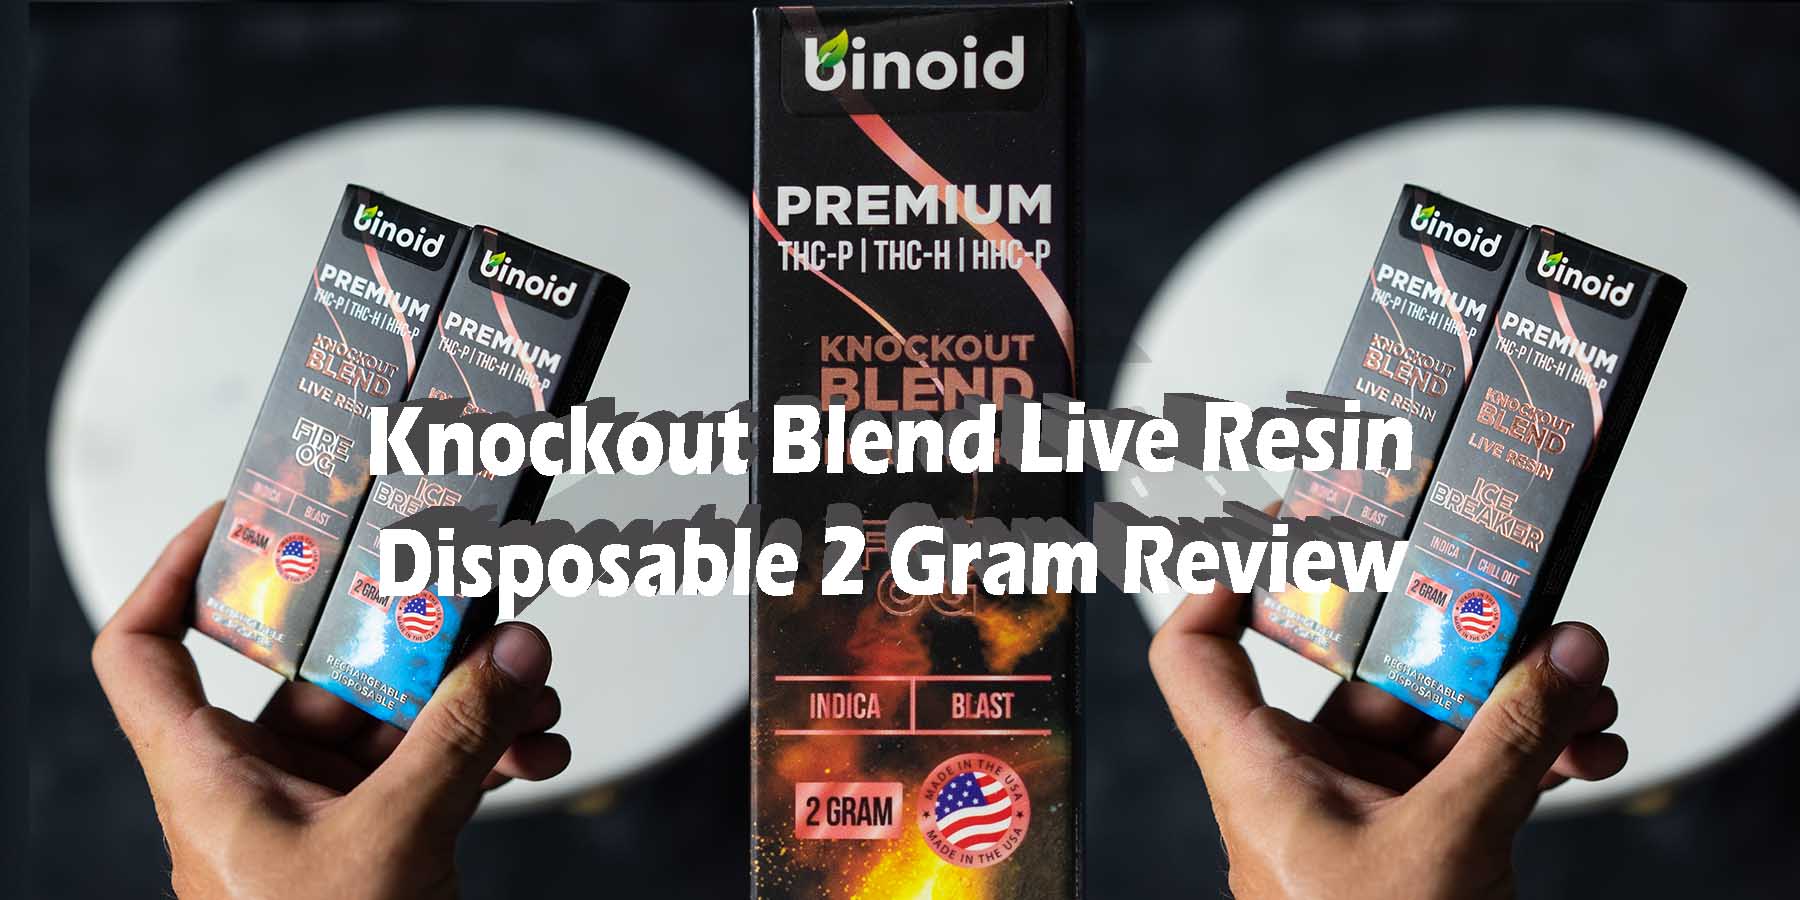 Knockout Blend Live Resin Disposable 2 Gram Review Online Best Brand Price Get Near Me Lowest Coupon Discount Store Shop Vapes Carts Online Best Brand Strongest Get Near Me